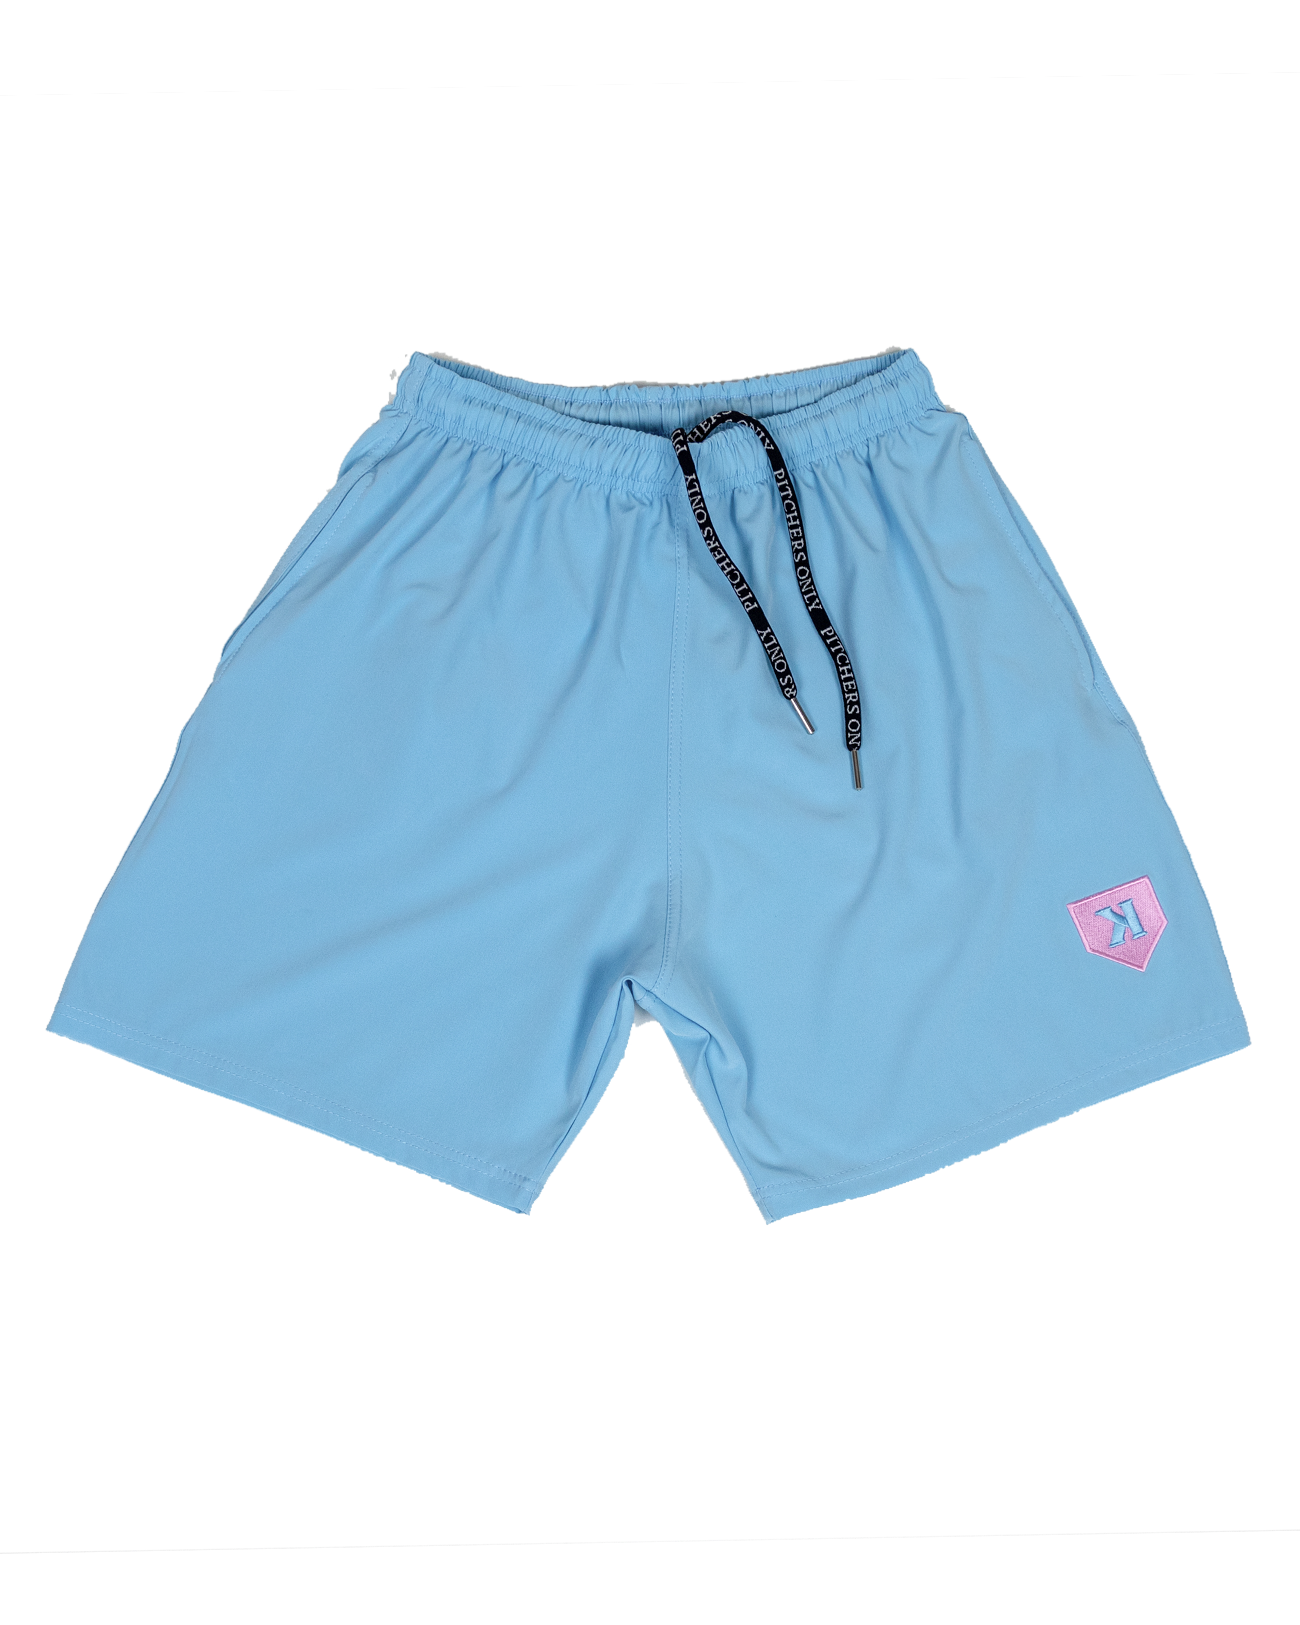 YOUTH Cotton Candy Blue Training Shorts